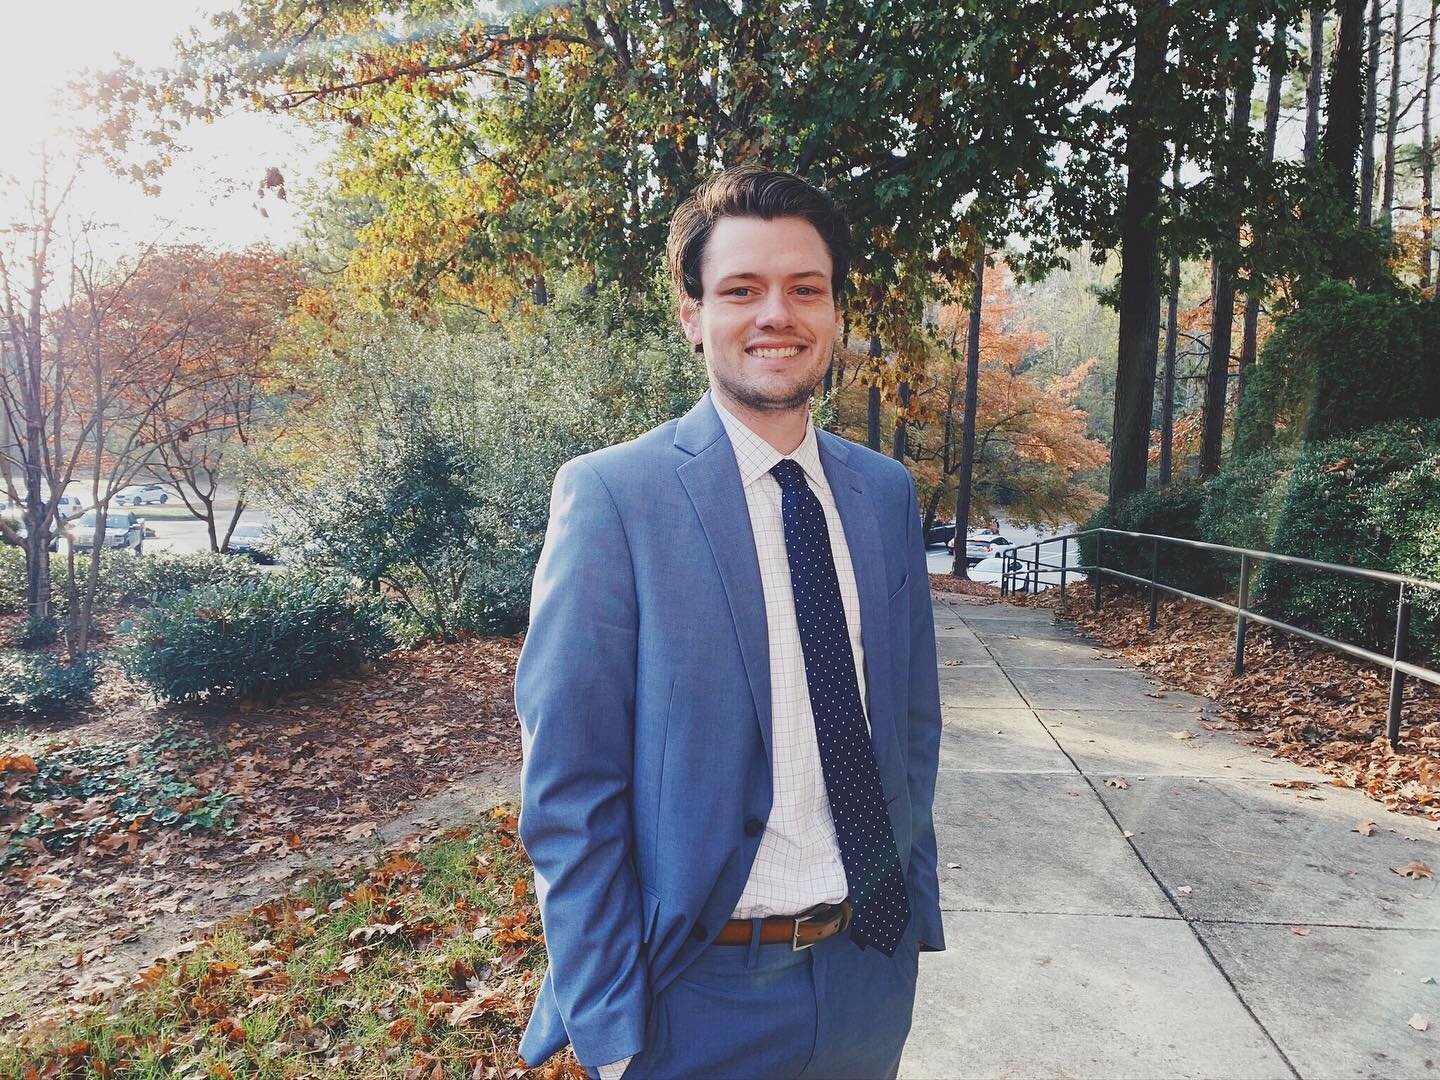 GET TO KNOW US ★ Chase ★
Chase is originally from Charlotte, North Carolina and attended East Carolina University where he graduated with a Finance degree. Chase realized quickly that as much as he loved crunching numbers he preferred to be helping p